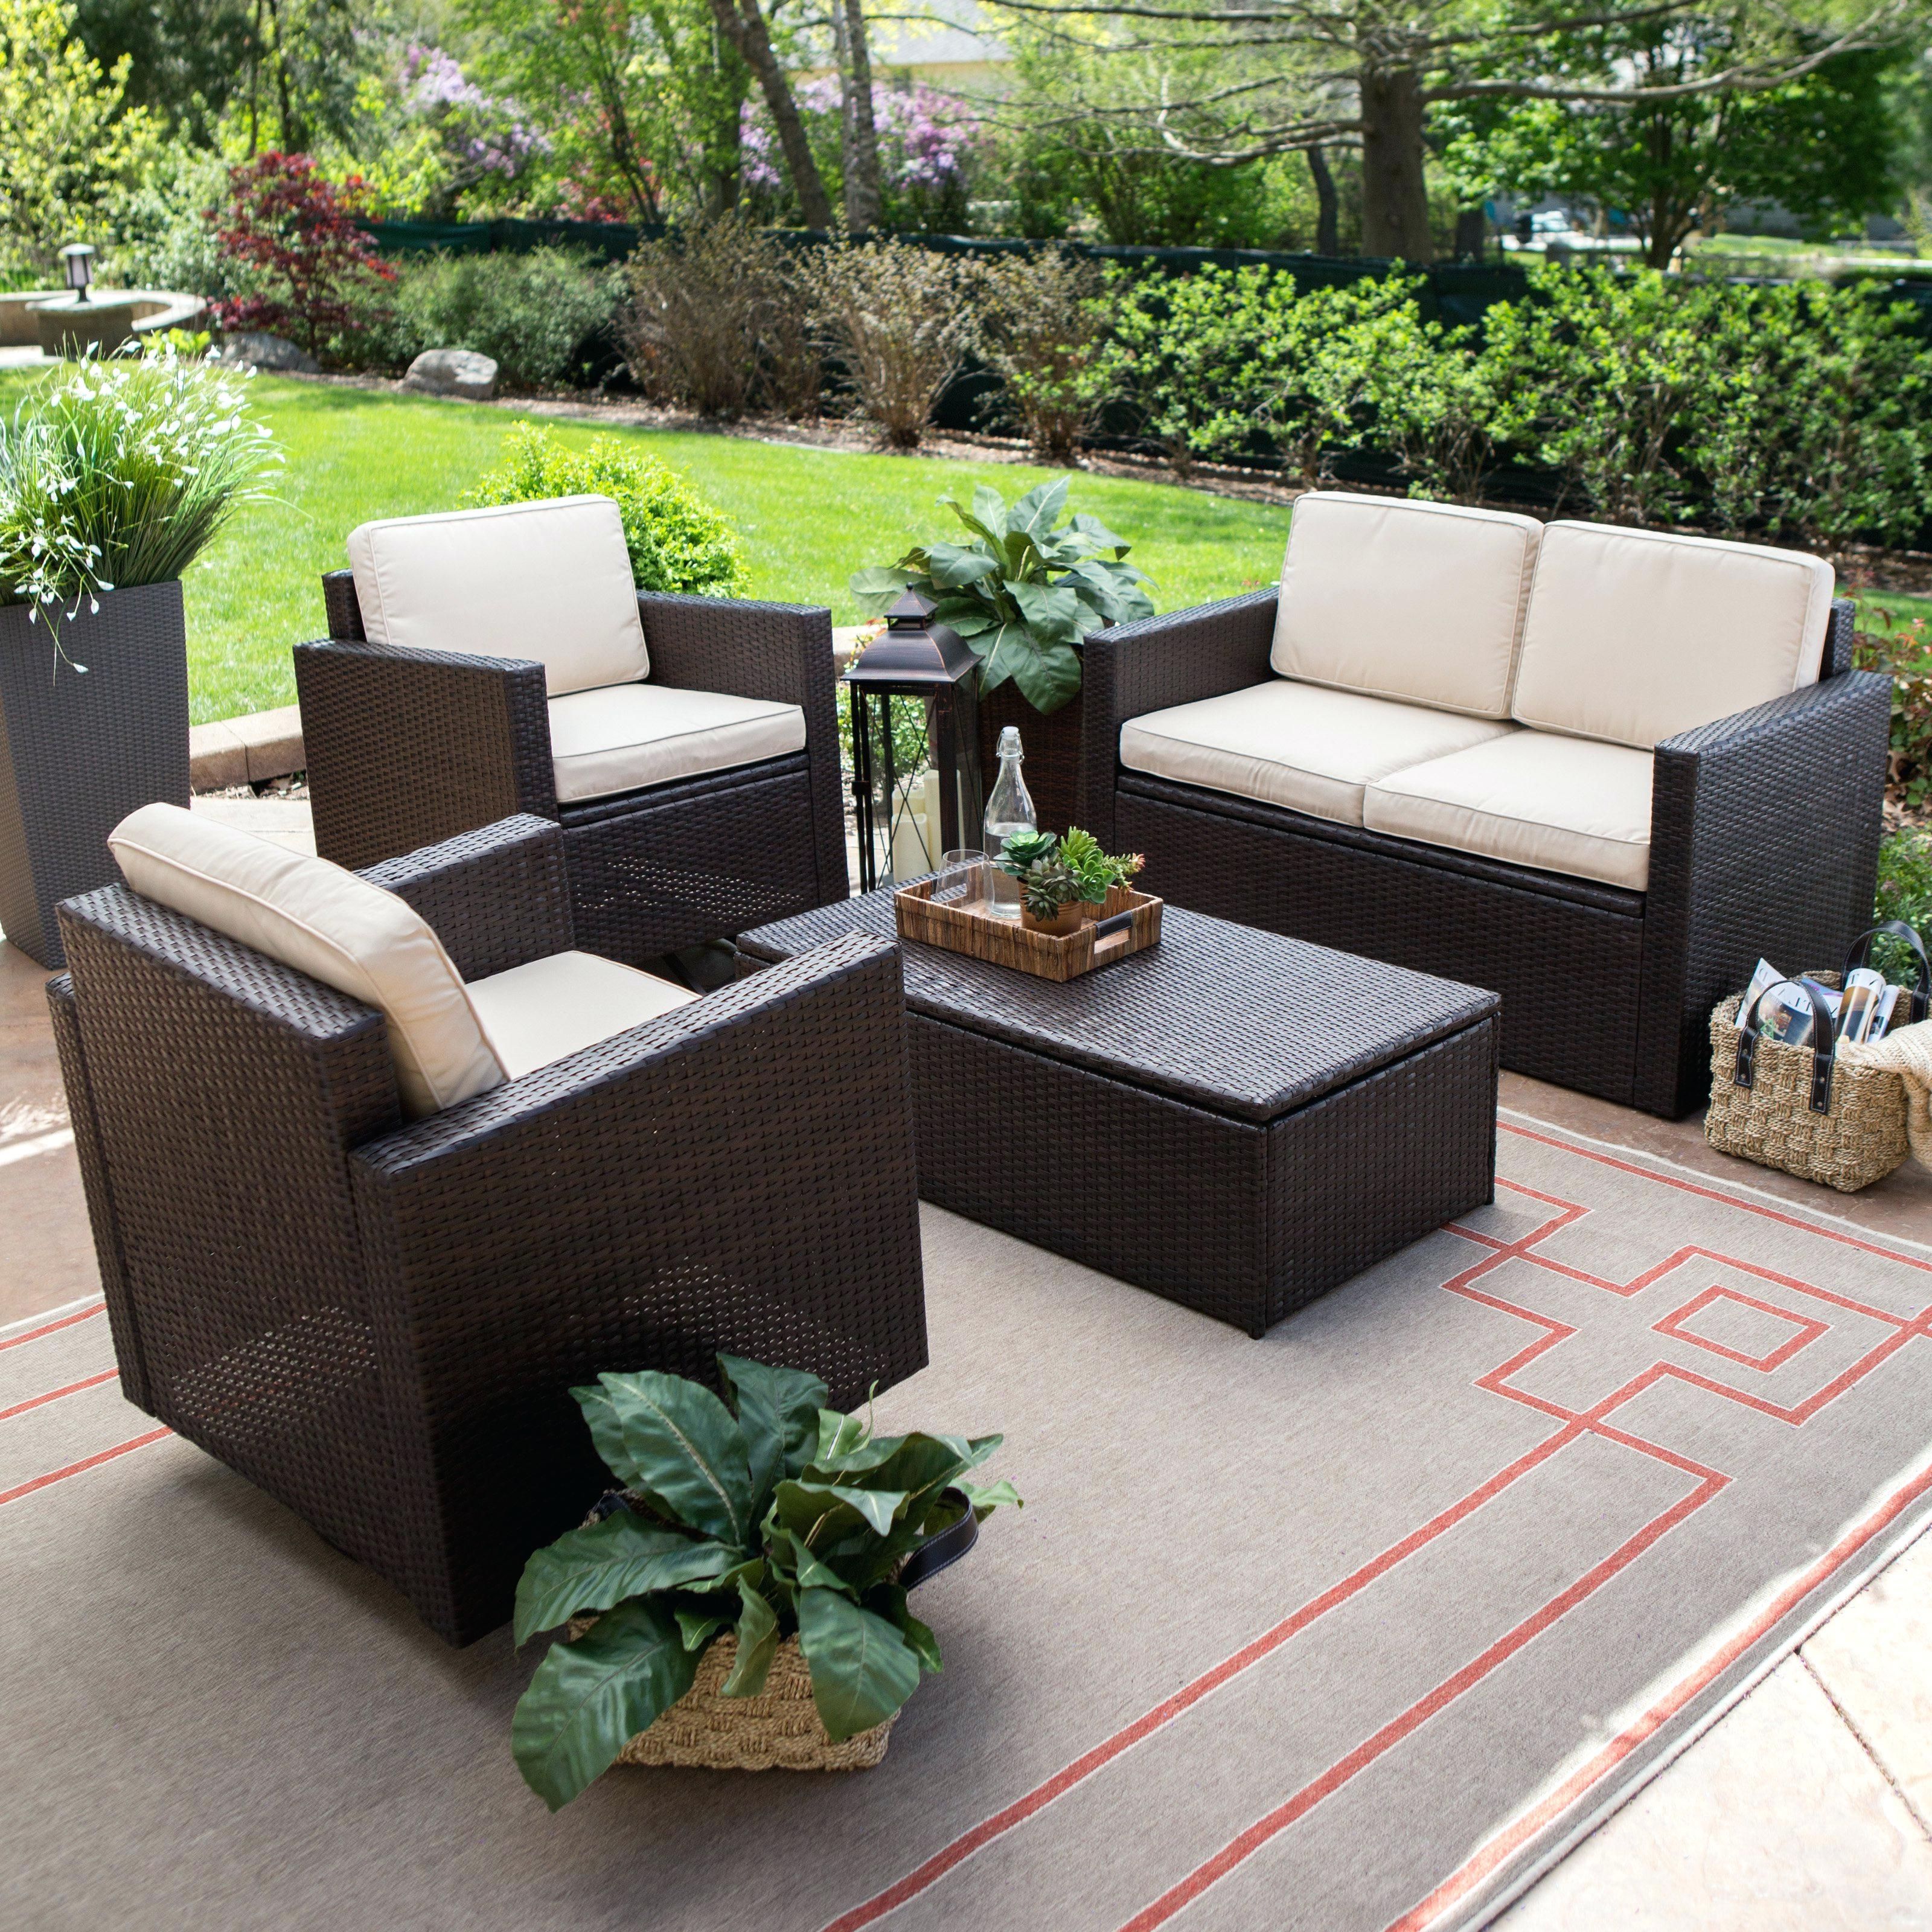 Patio Conversation Sets Coral Coast Wicker 4 Piece Conversation Set With Latest Patio Conversation Set With Storage (View 1 of 15)